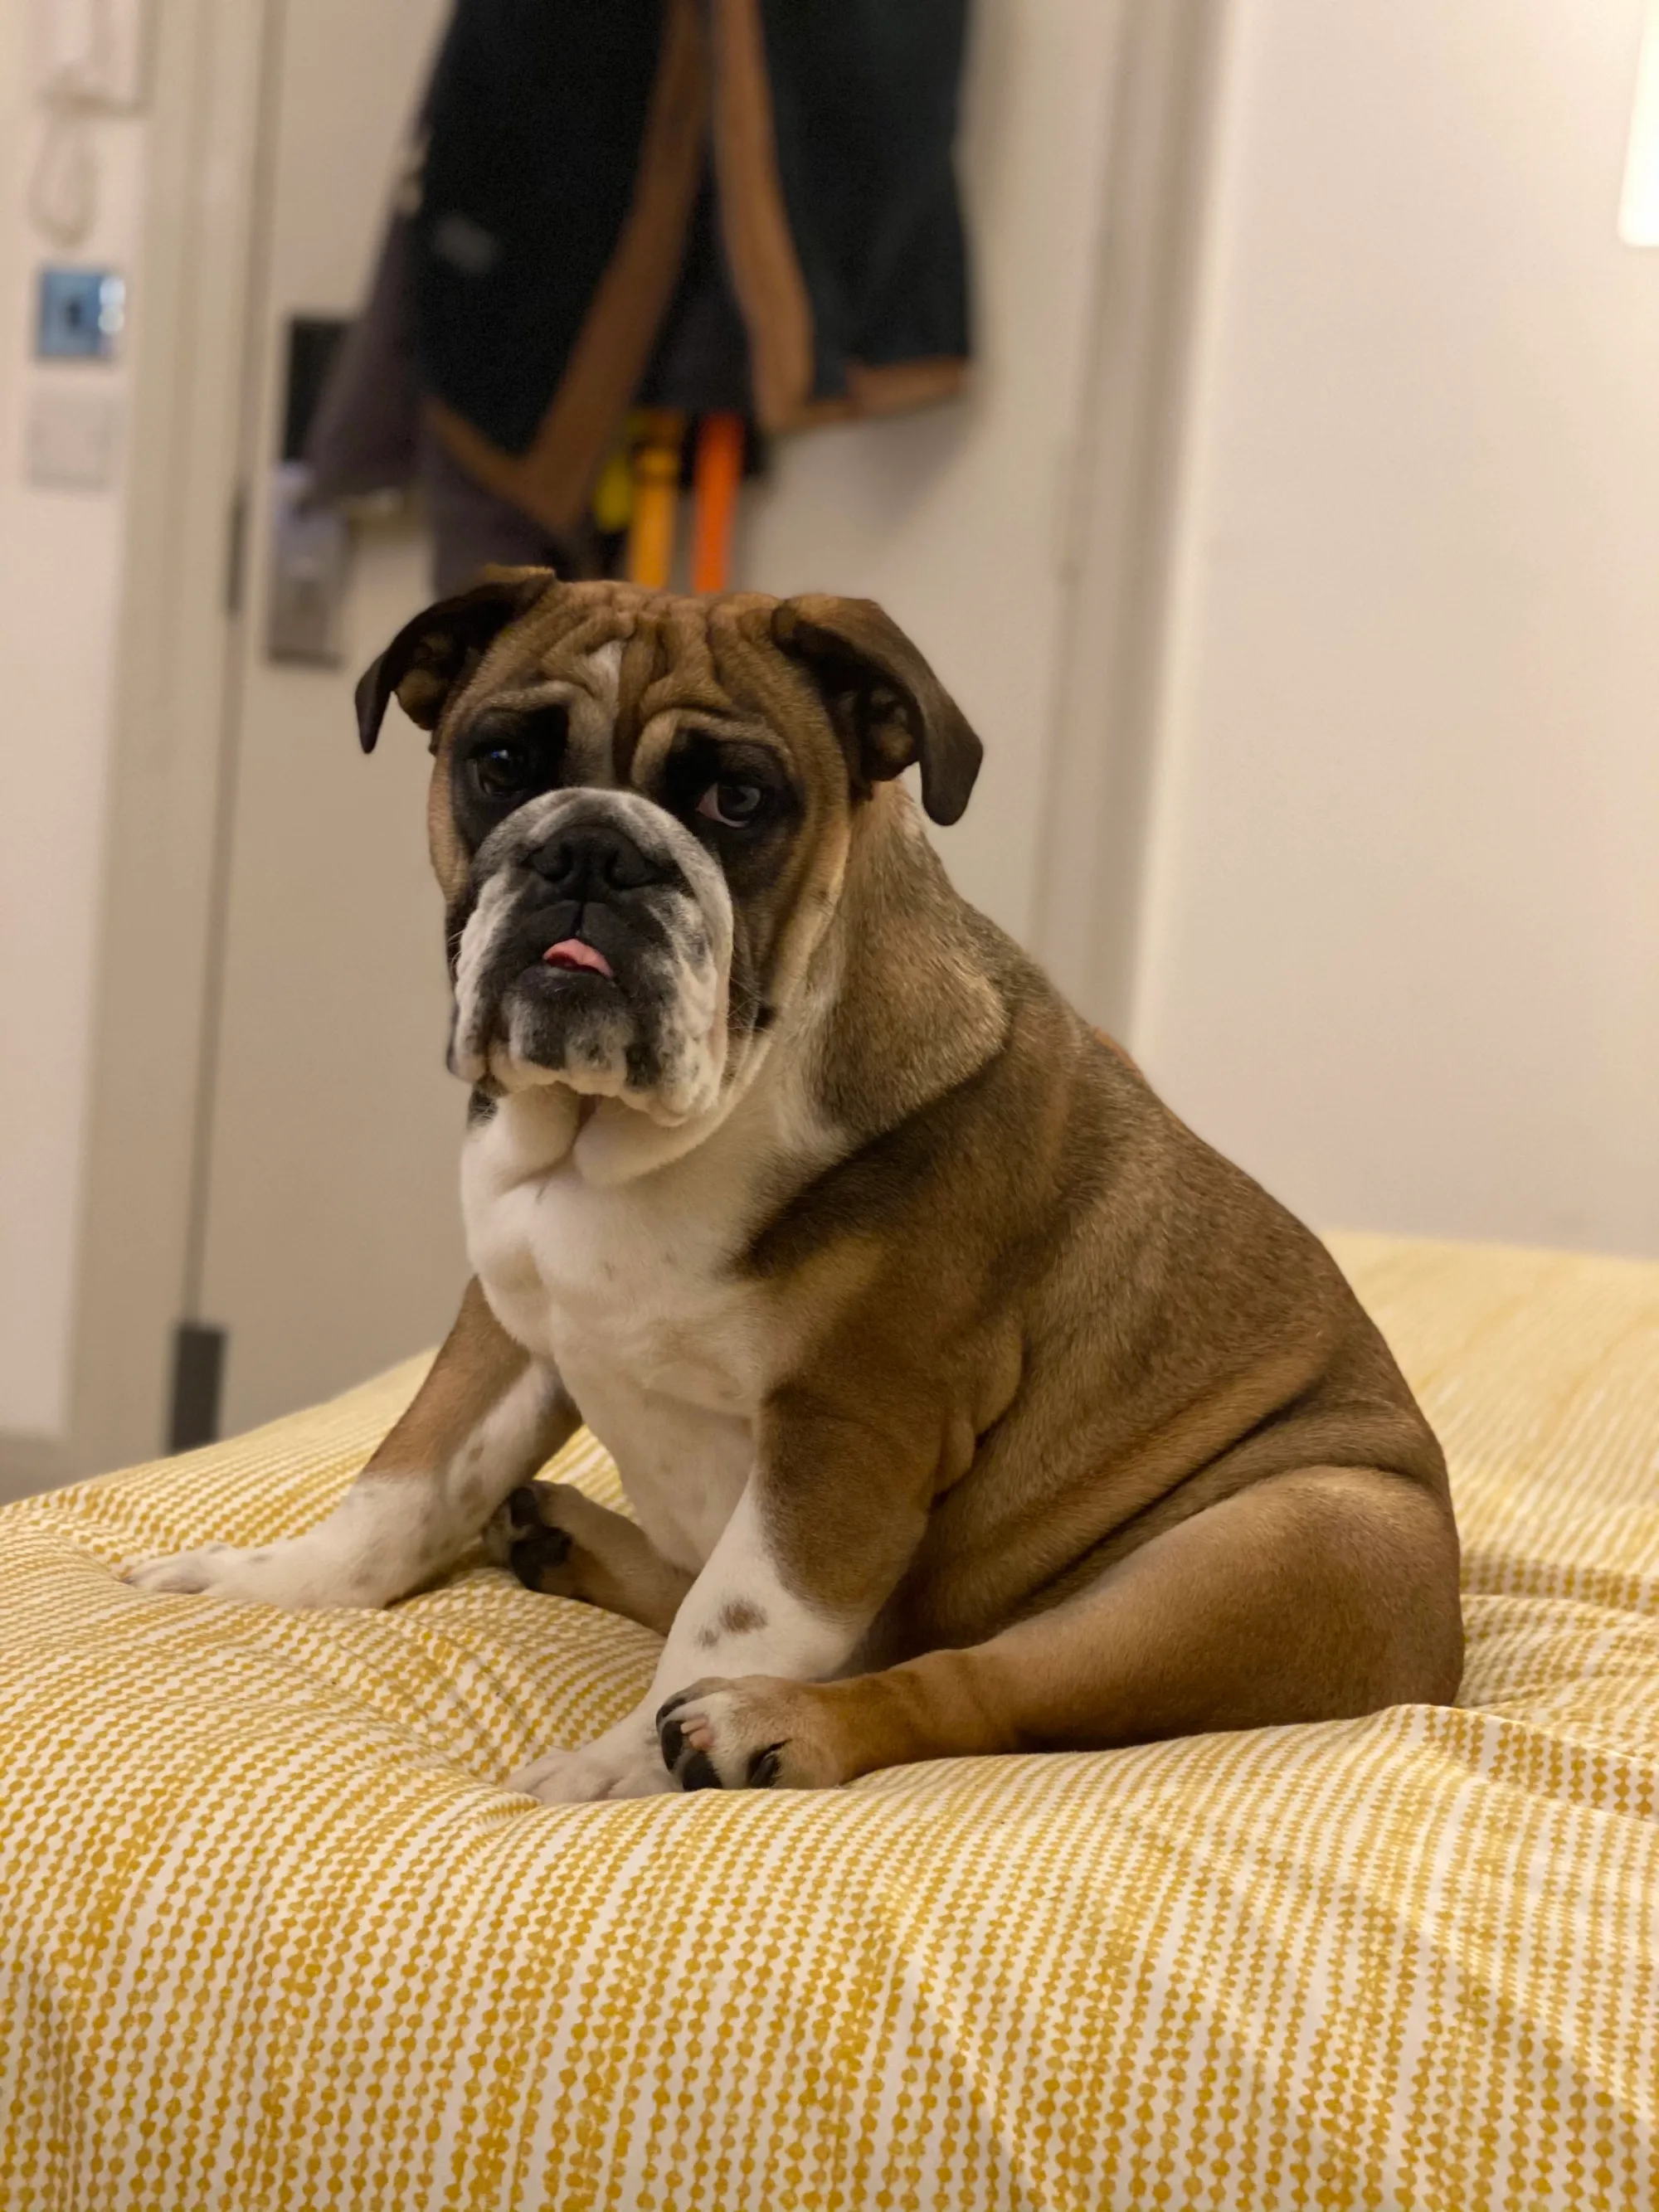 This is Luna sitting on my bed - you're a dog dad - furrimals